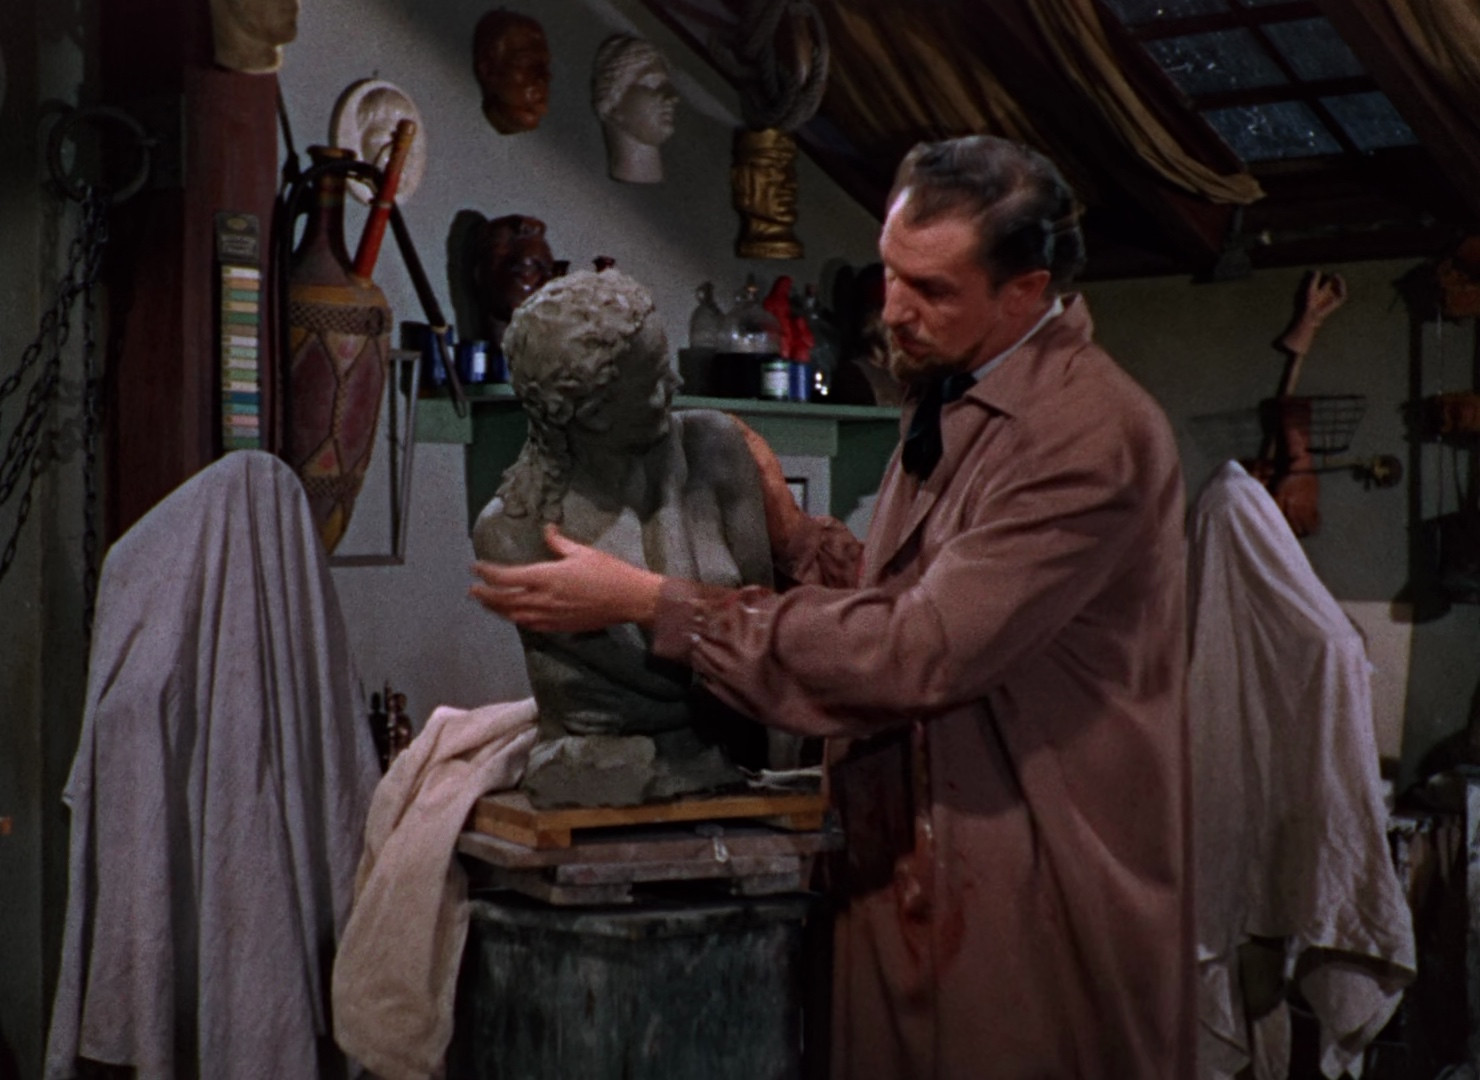 House of Wax 1953 Remastered 1080p BluRay x265 HEVC 10bit AAC 2 0 Commentary Andre de Toth Vincent Price Frank Lovejoy Phyllis Kirk Carolyn Jones